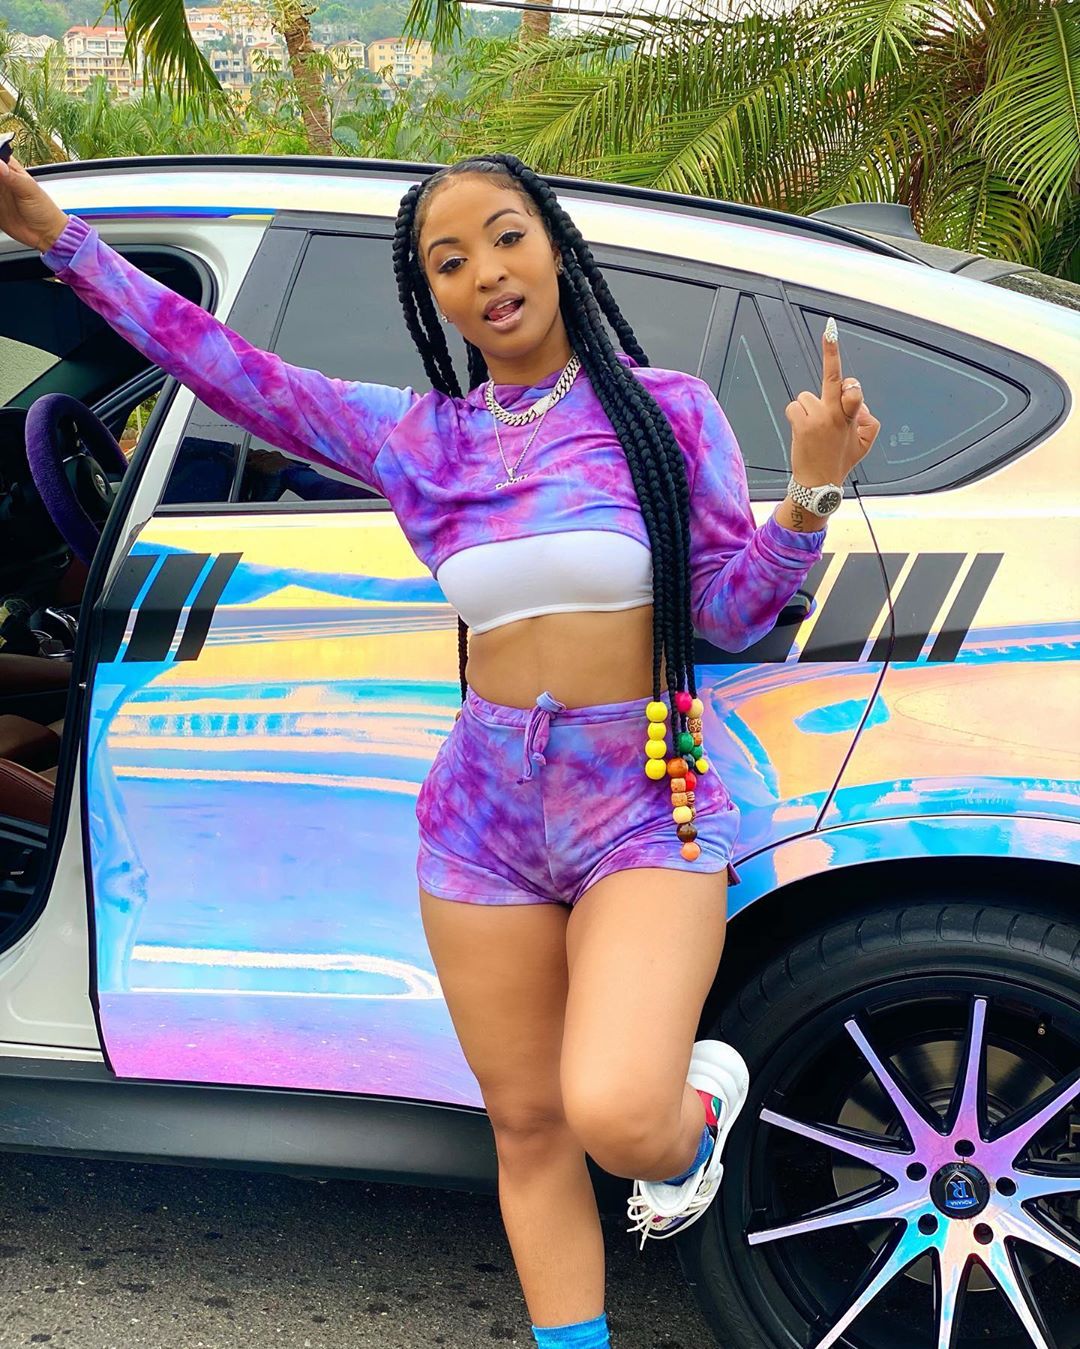 Shenseea did not respond to the rumor circulating online